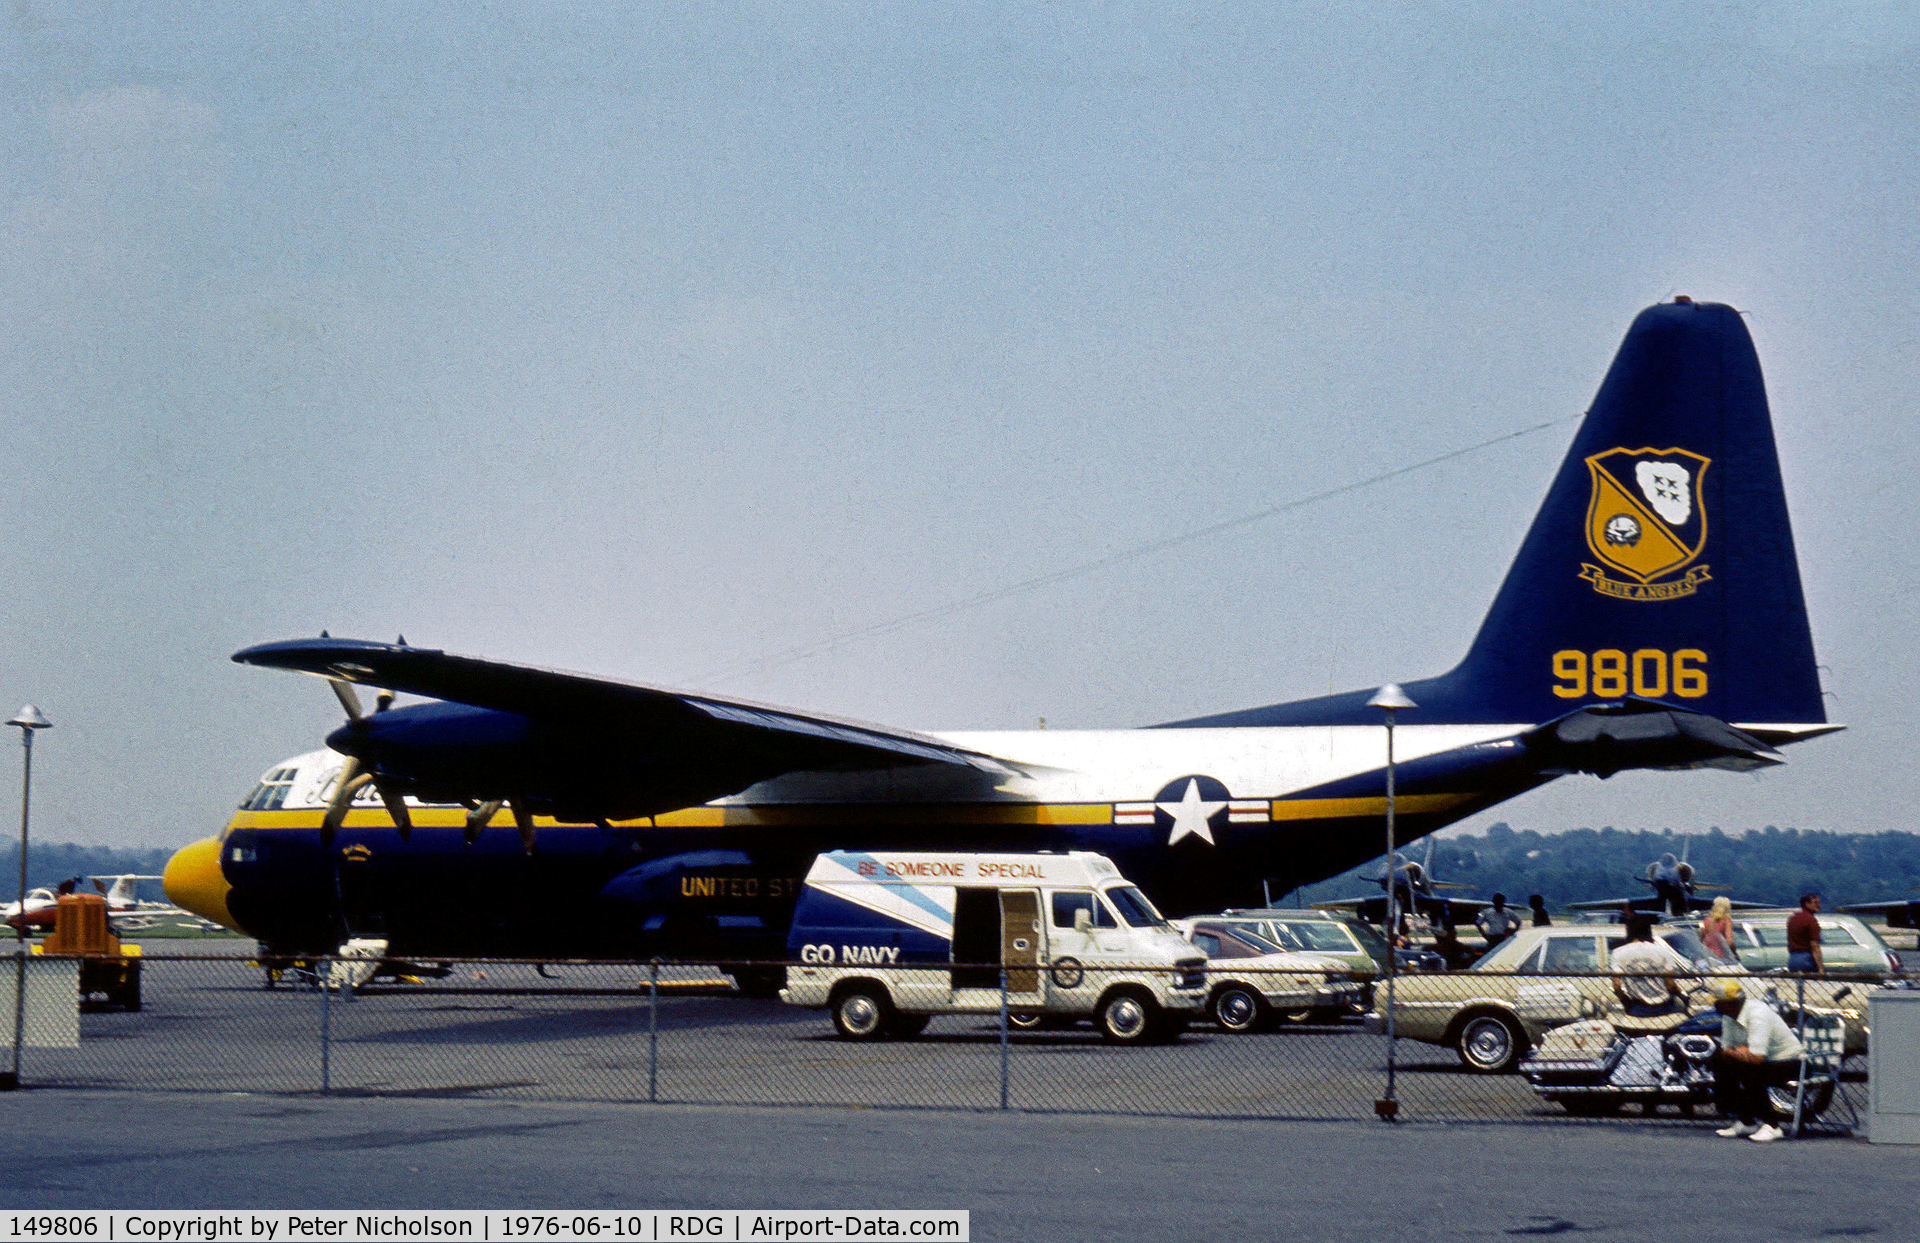 149806, 1963 Lockheed KC-130F Hercules C/N 282-3703, KC-130F Hercules support aircraft for the Blue Angels Flight Demonstration Team as seen at the 1976 Reading Airshow.